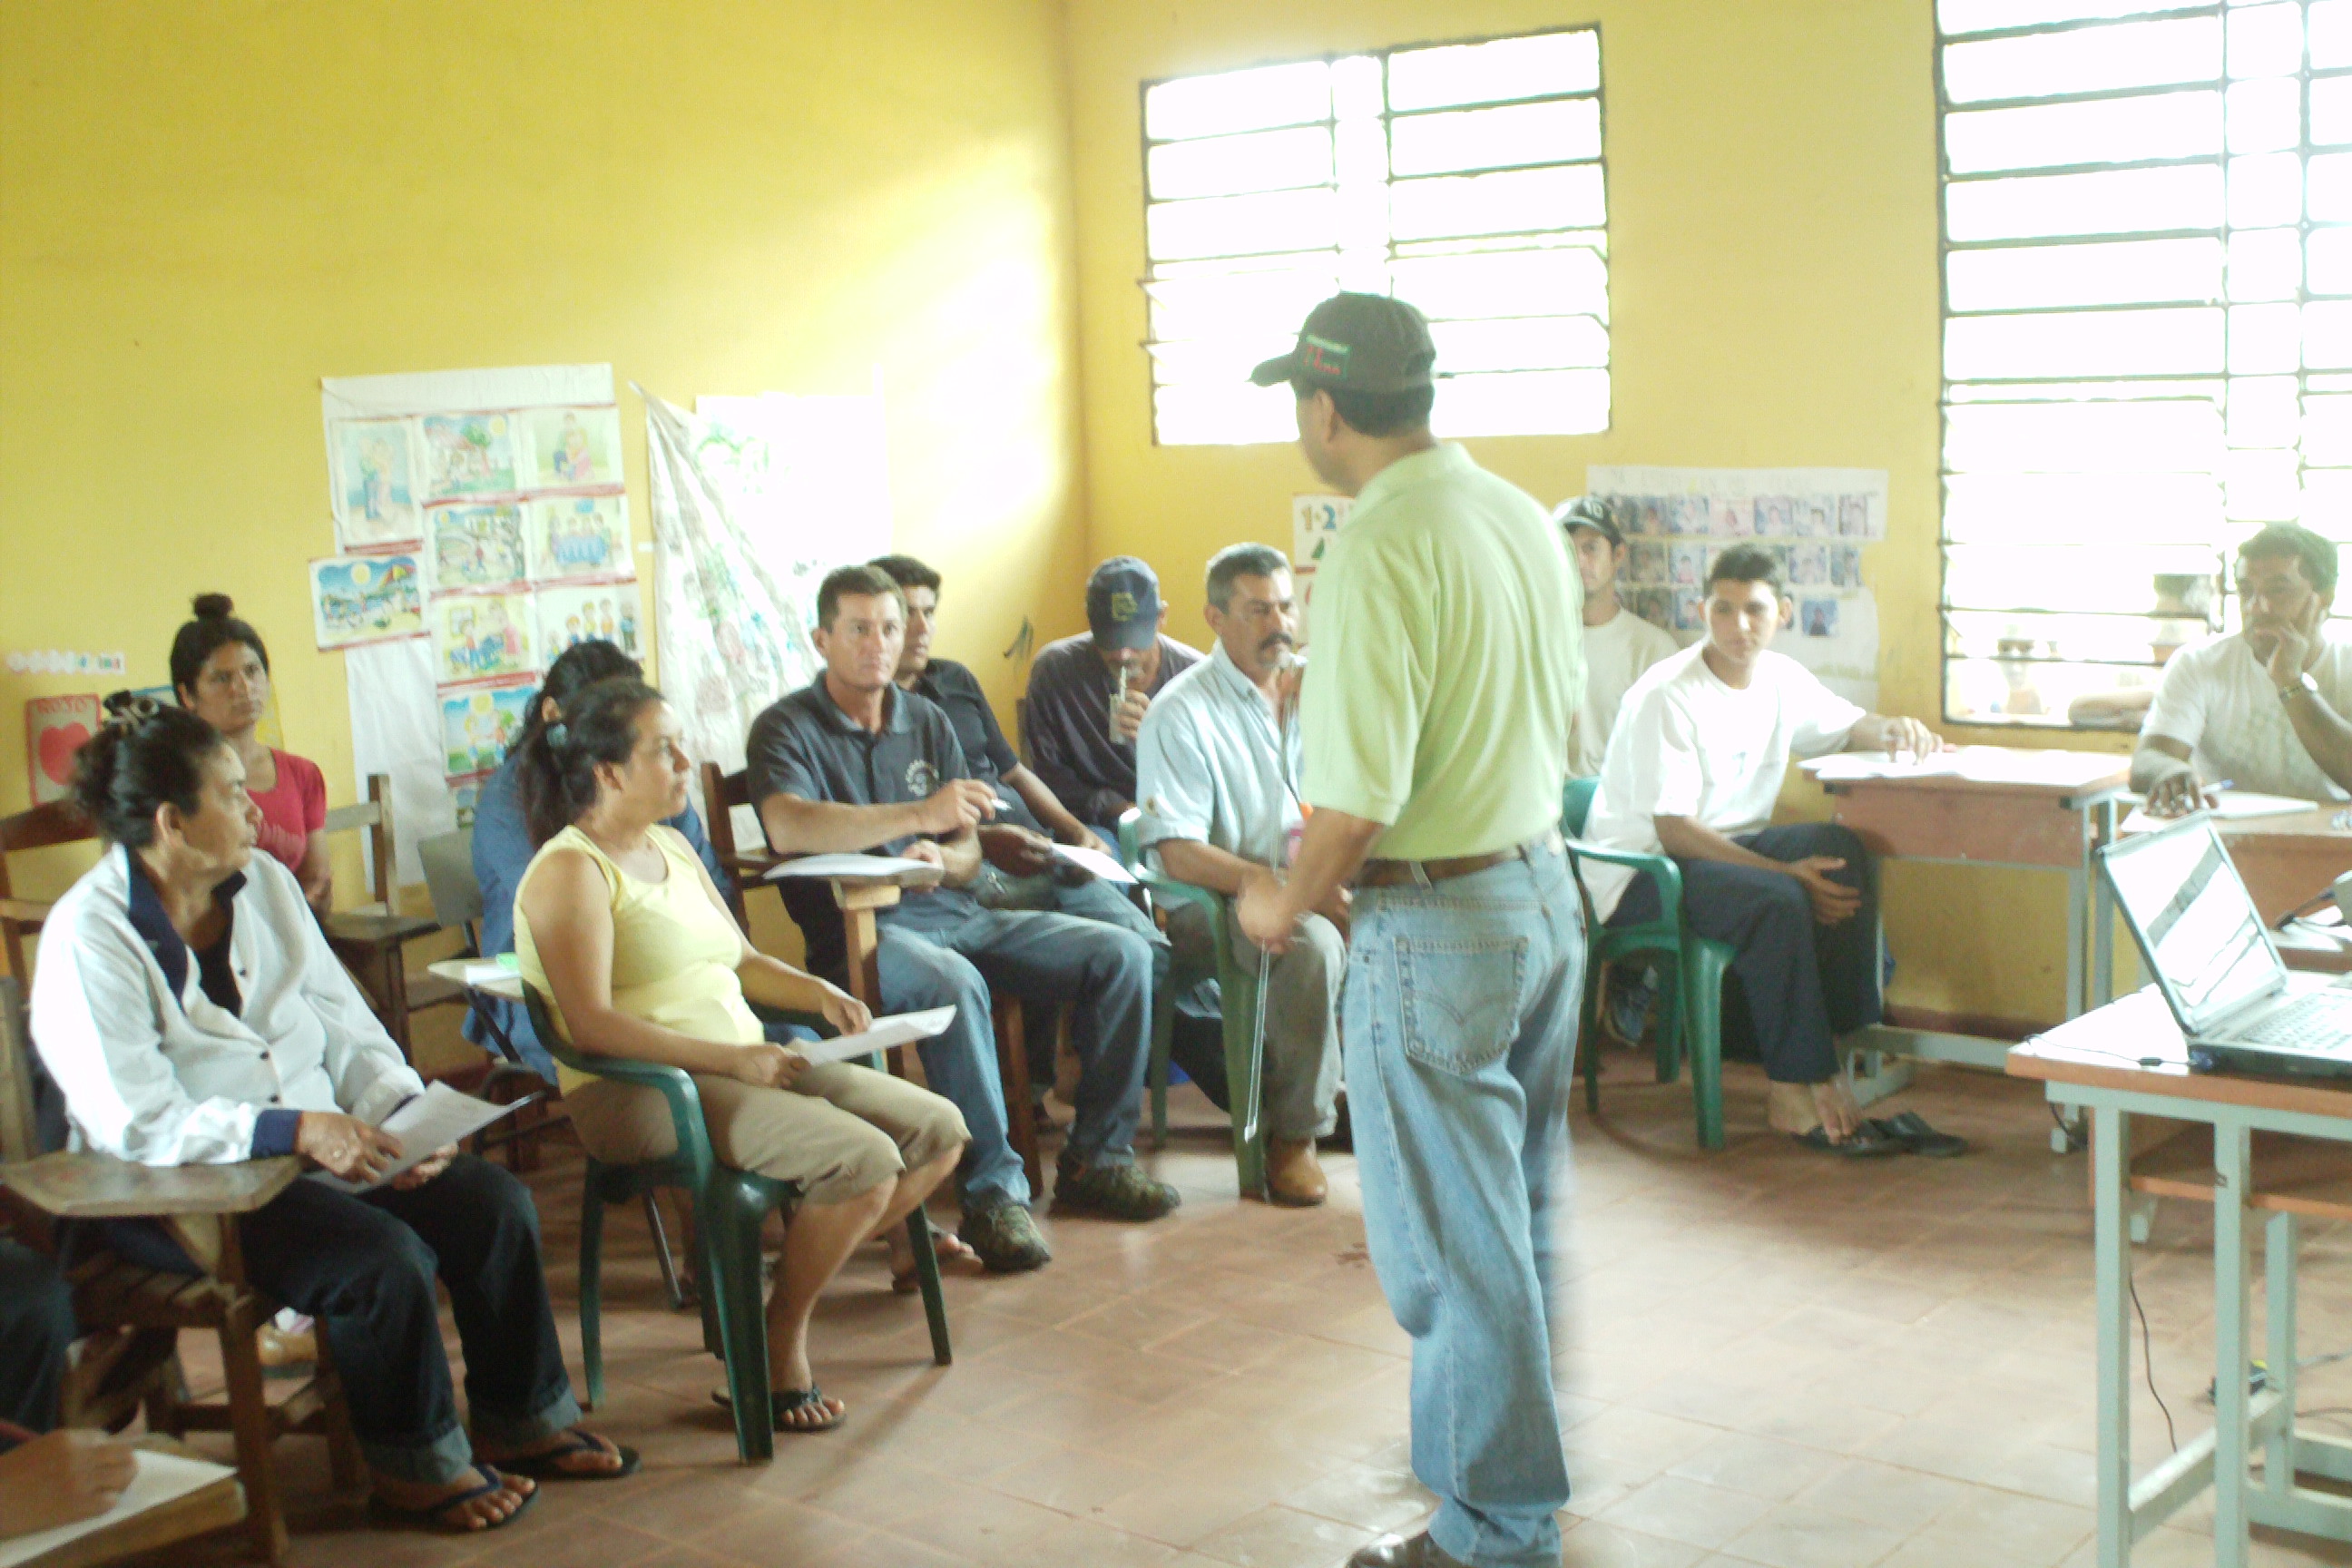 Course held on Ecological Pest Management in Paraguay